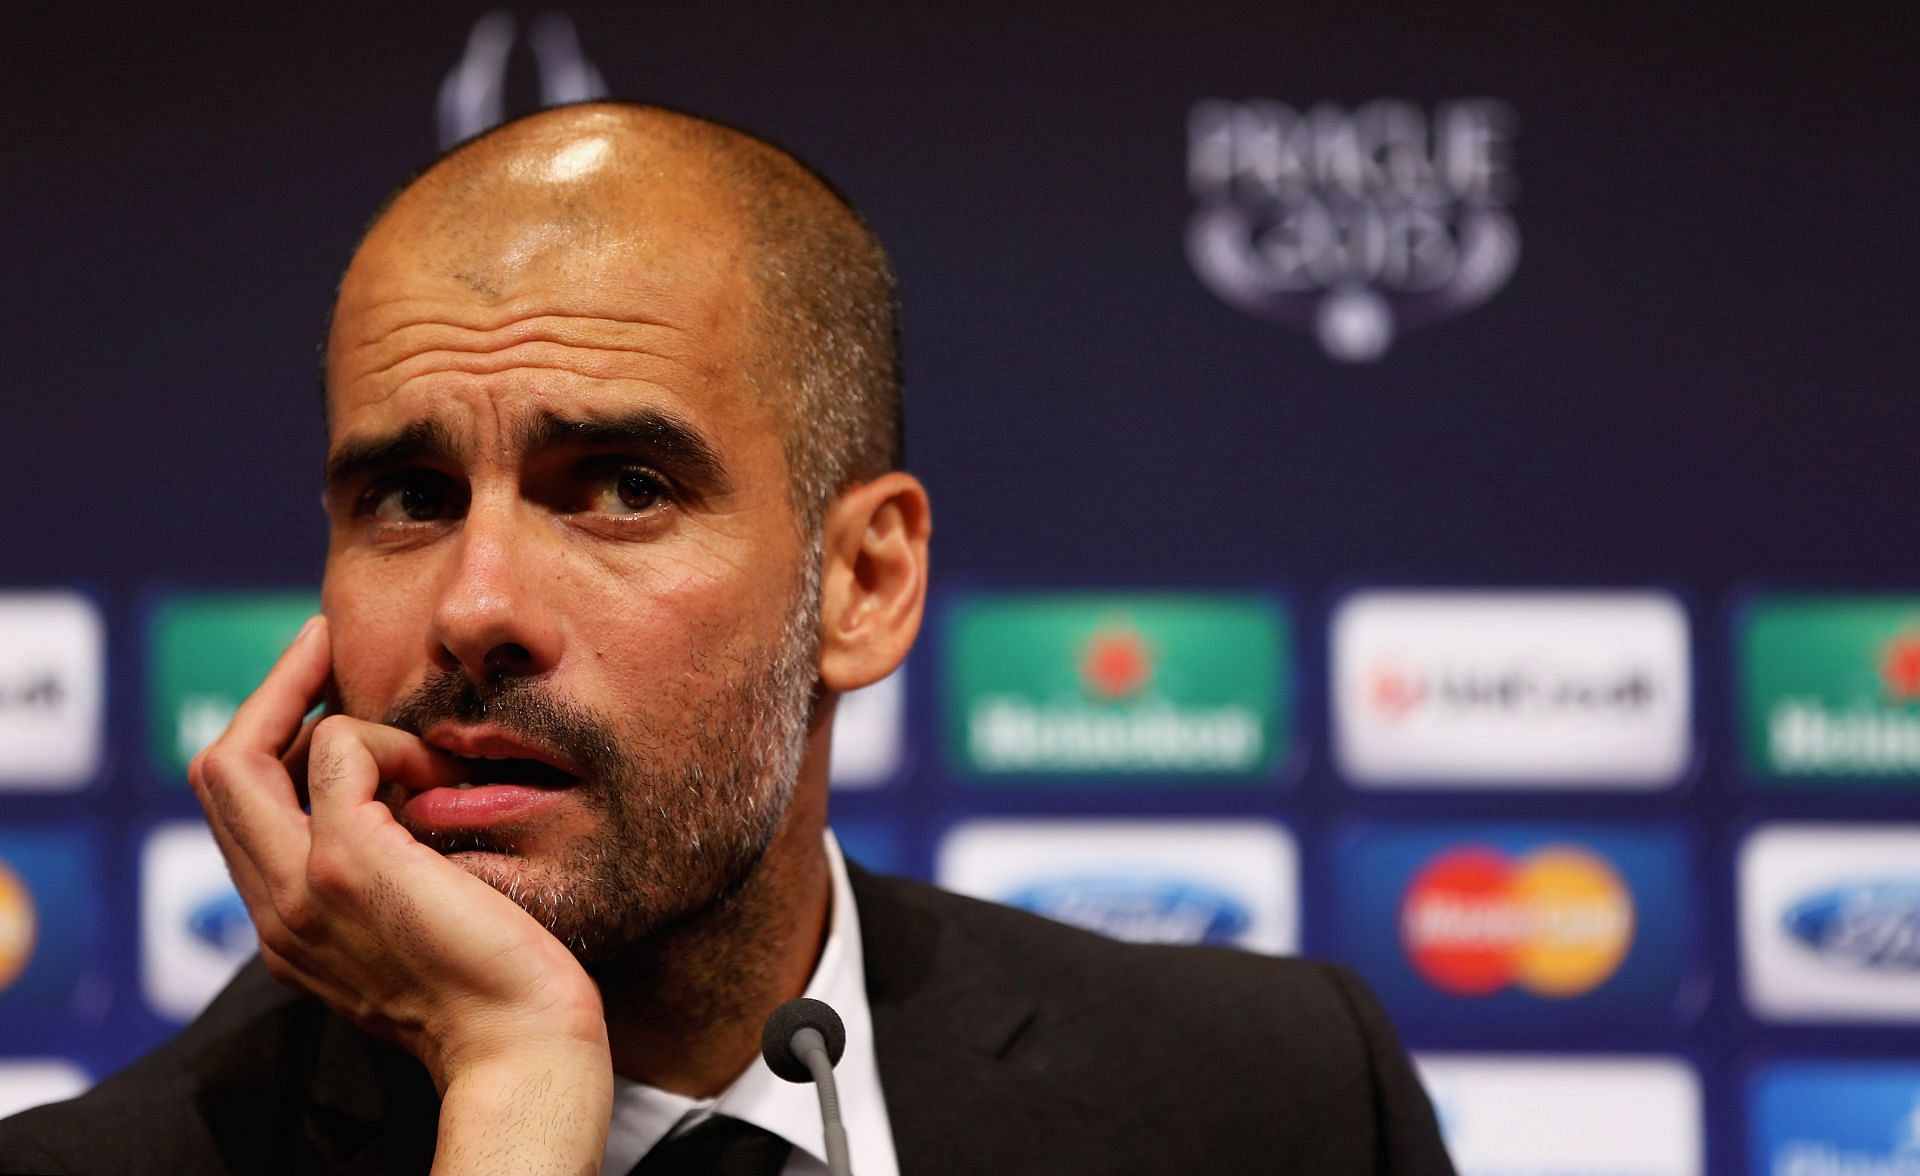 Pep Guardiola wanted a job in England after leaving Bayern.